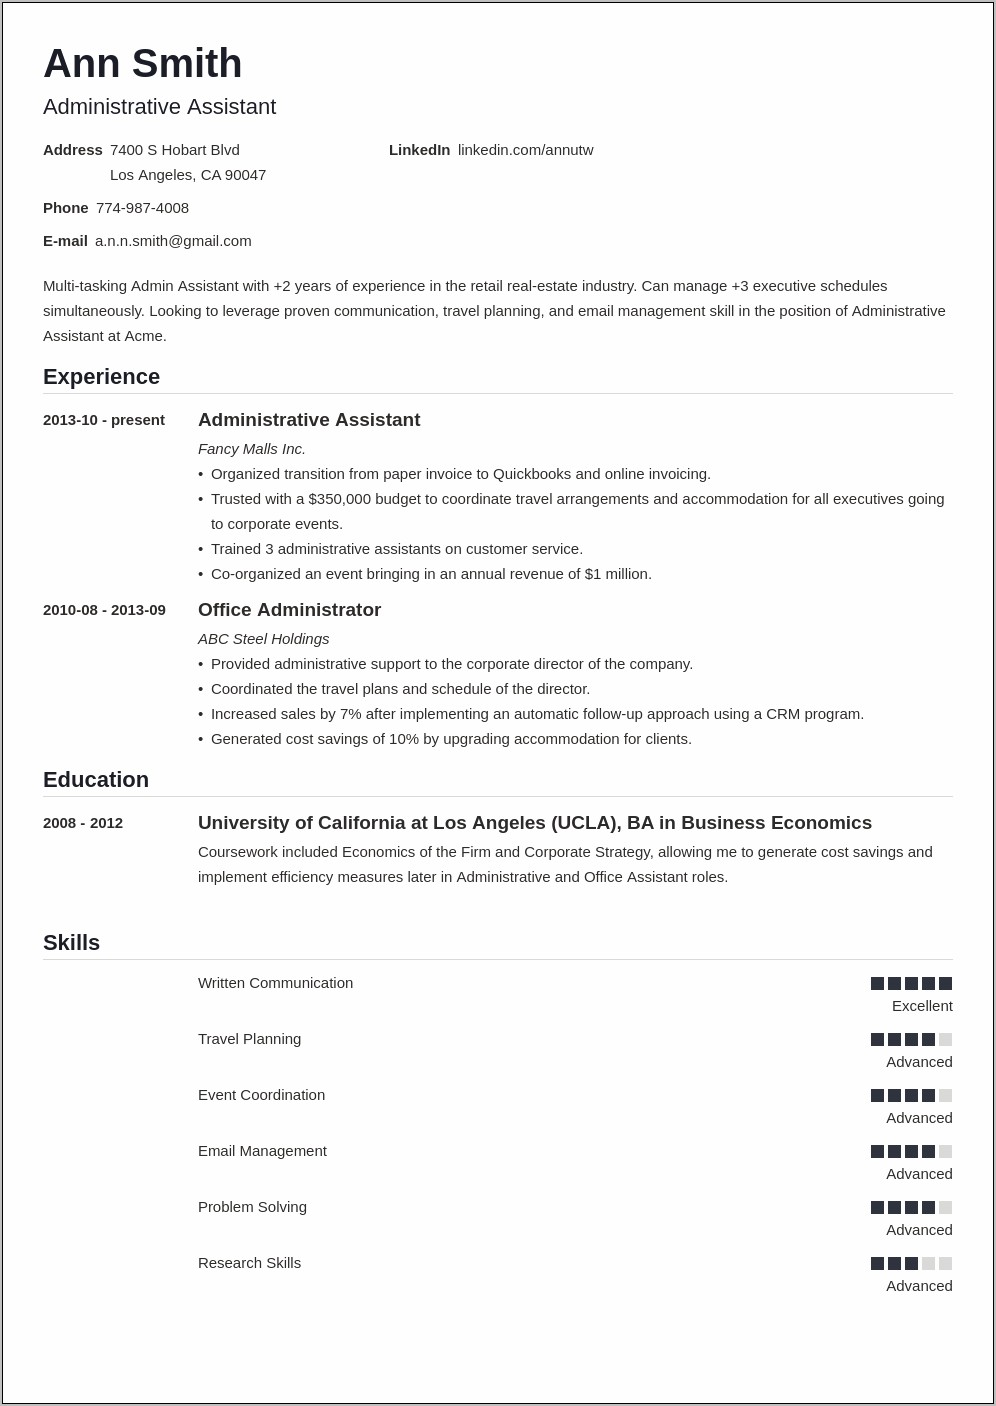 Relevant Coursework Skills Example Resume Administrative